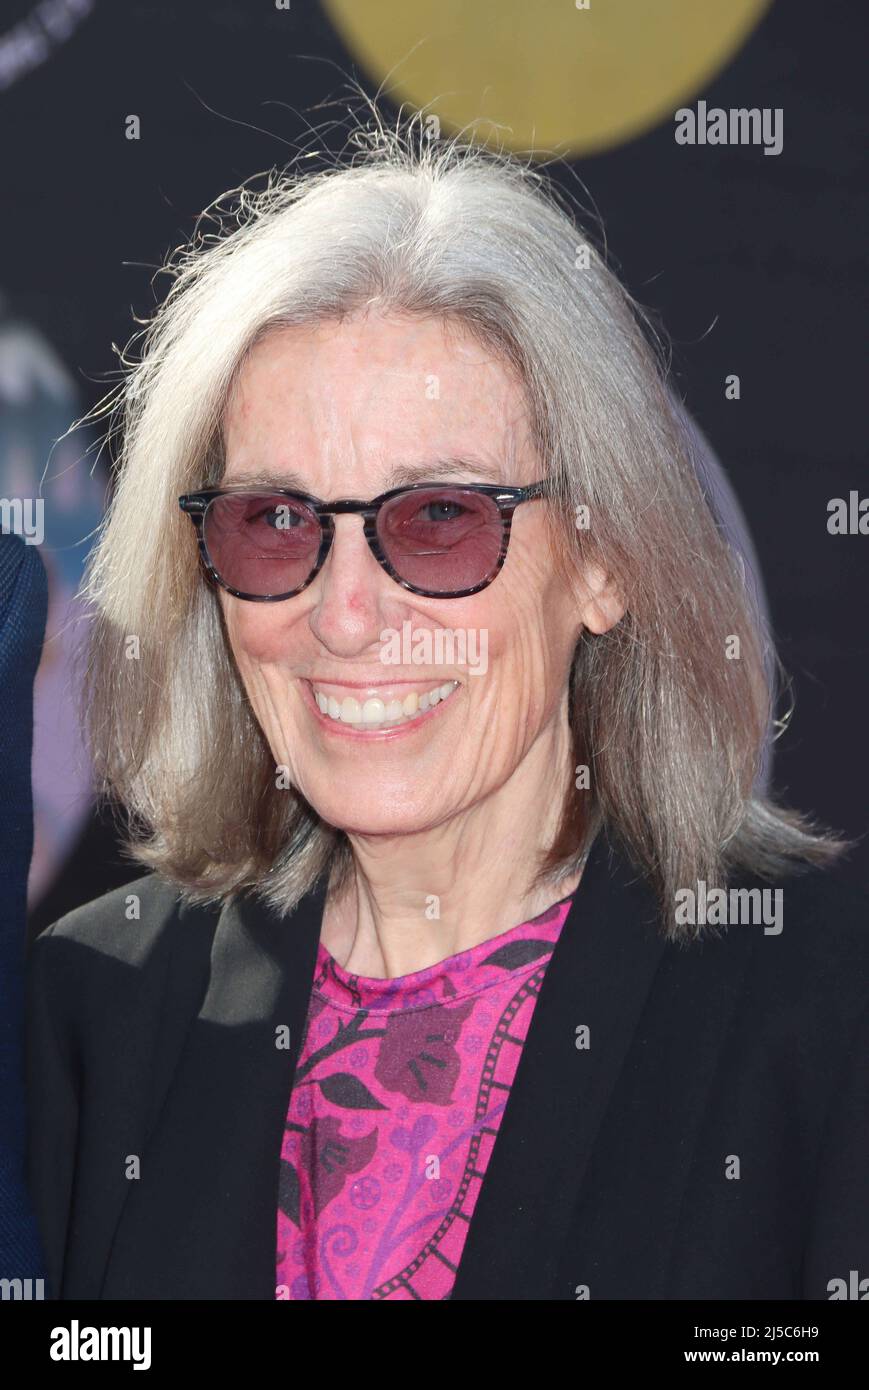 Los Angeles, USA. 21st Apr, 2022. Carol Littleton 2022/04/21 The 40th Anniversary Screening of “E.T. the Extra-Terrestrial” held at TCL Chinese Theatre in Hollywood, CA, Credit: Cronos/Alamy Live News Stock Photo